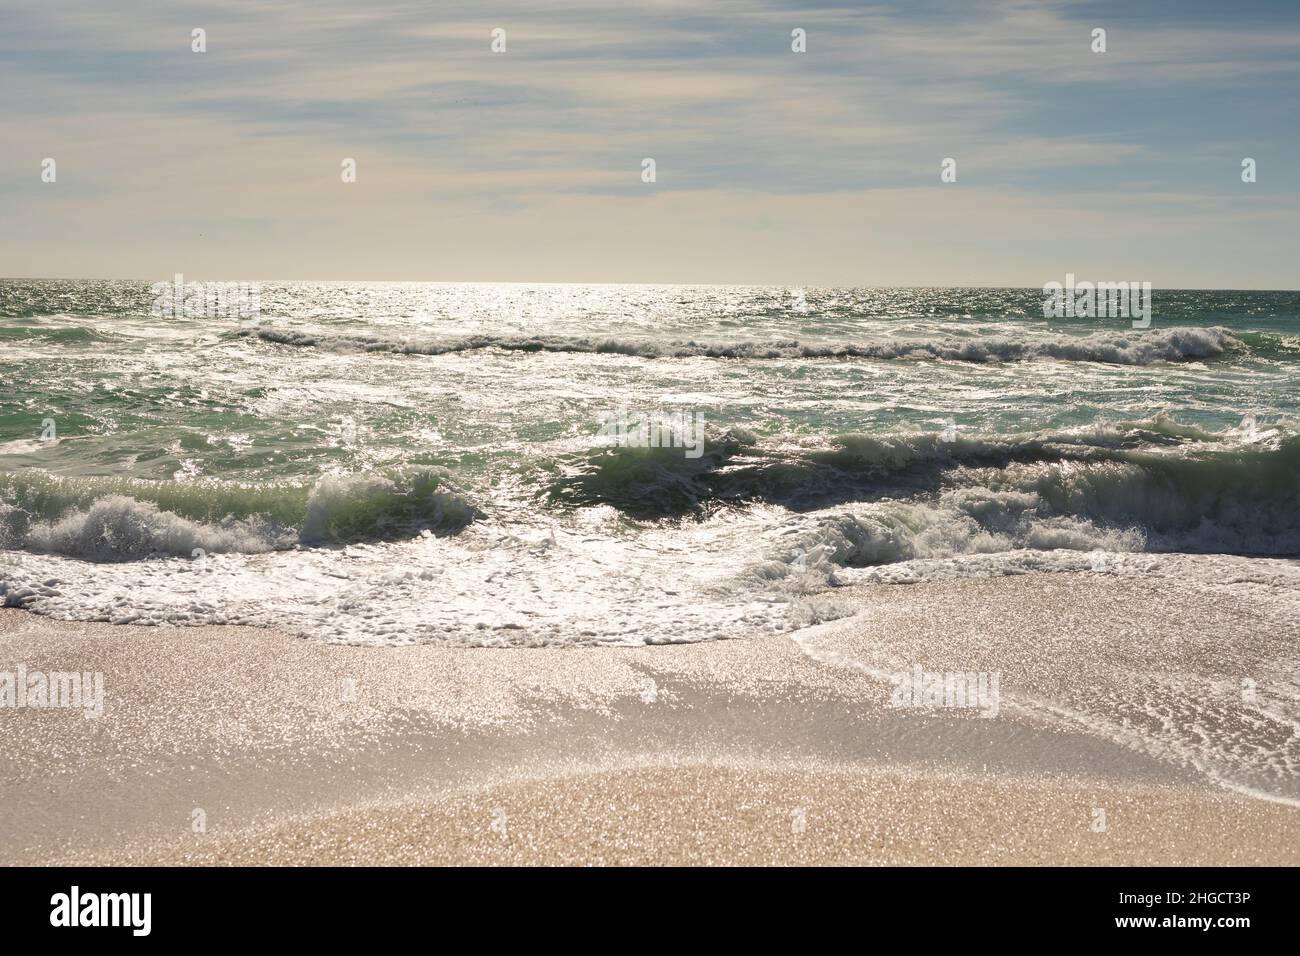 Scenic view of waves crashing on shore at beach against sky during sunny day Stock Photo